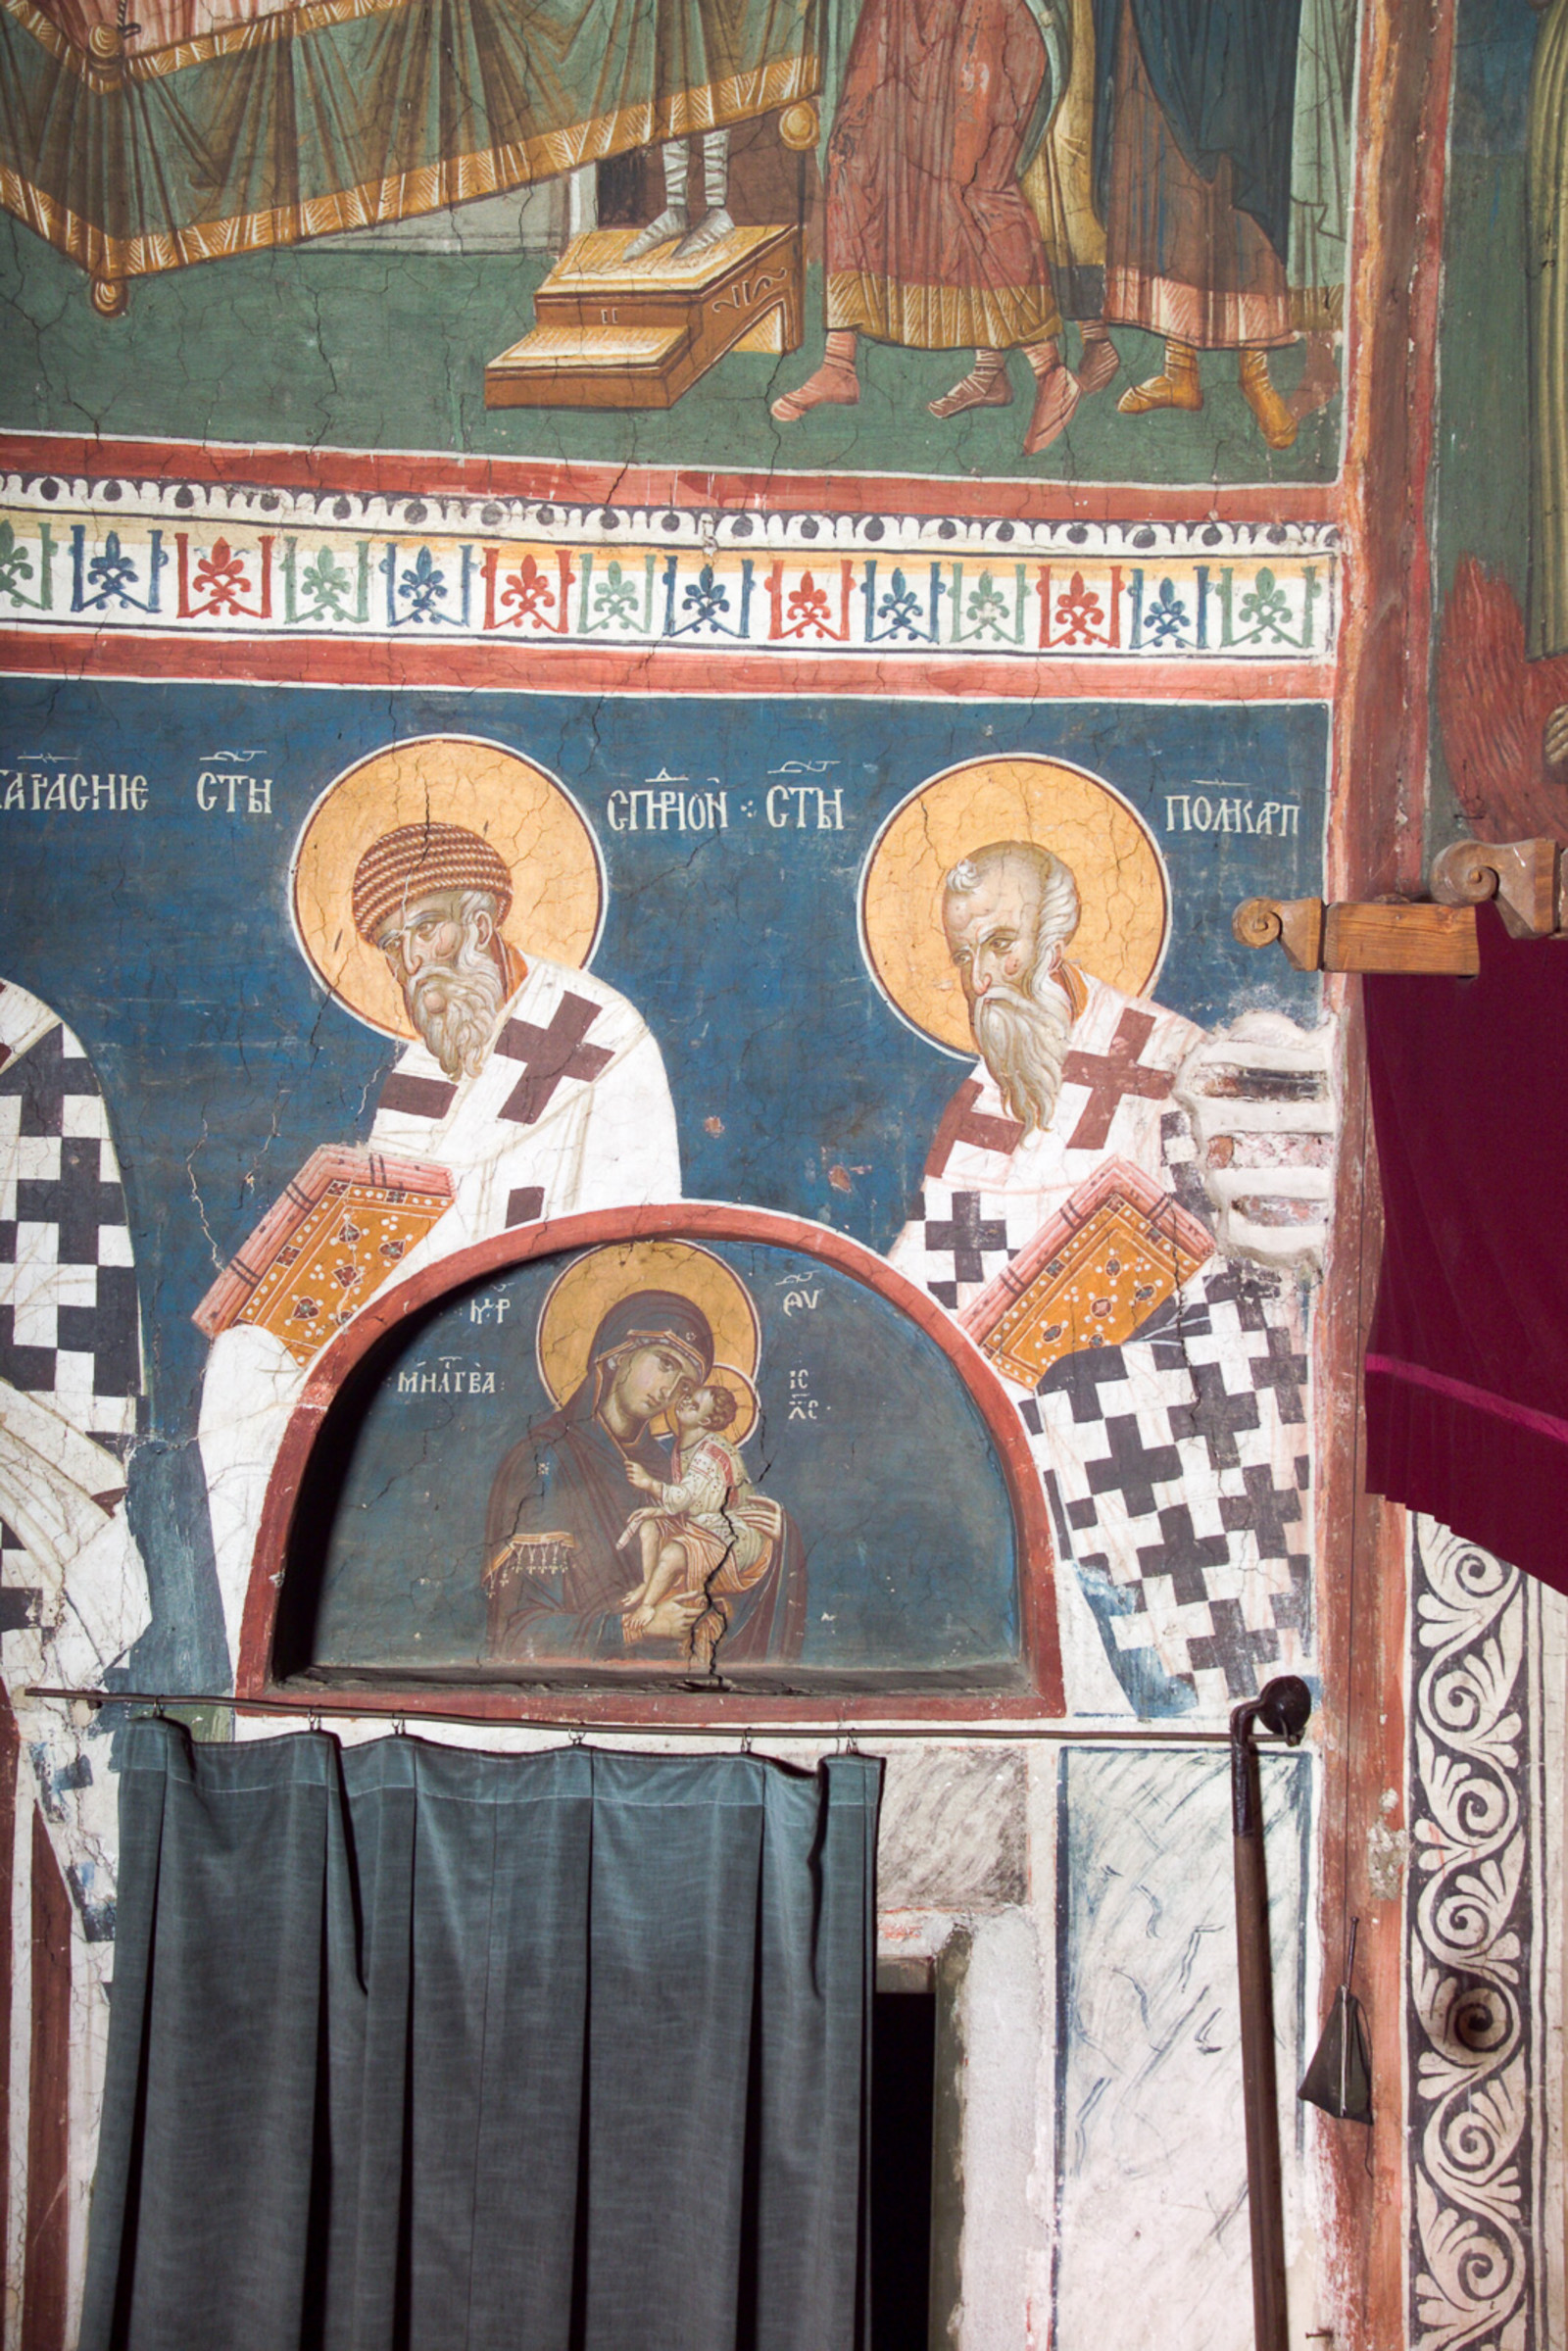 29,30 Officiating Church Fathers: St. Spyridon (left) and St. Polycarp (right)